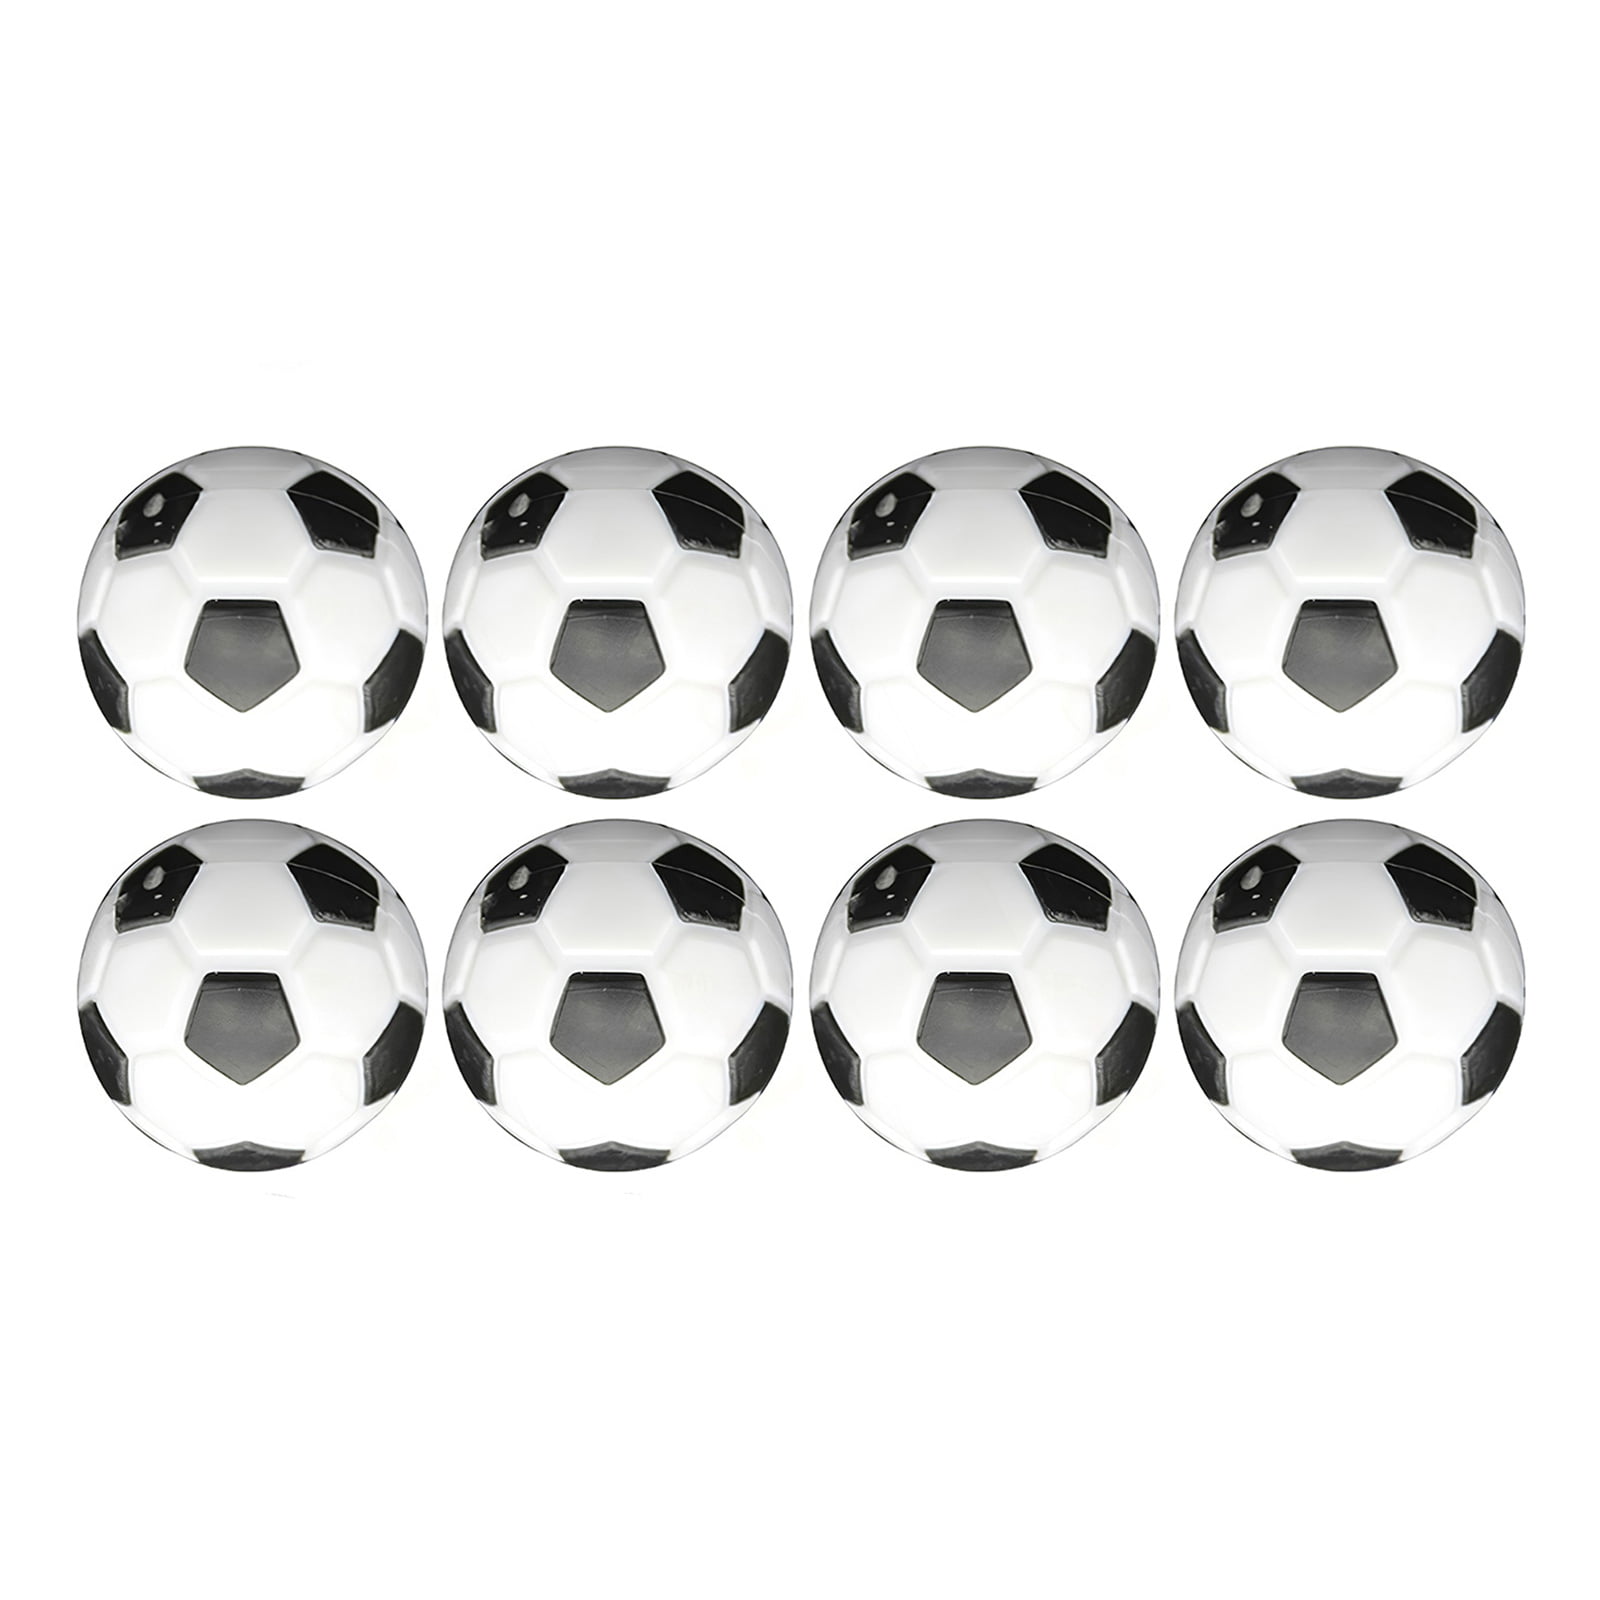 8PCS Foosball Balls Fussball Ball Replacement Table Soccer Game Toy Accessory 